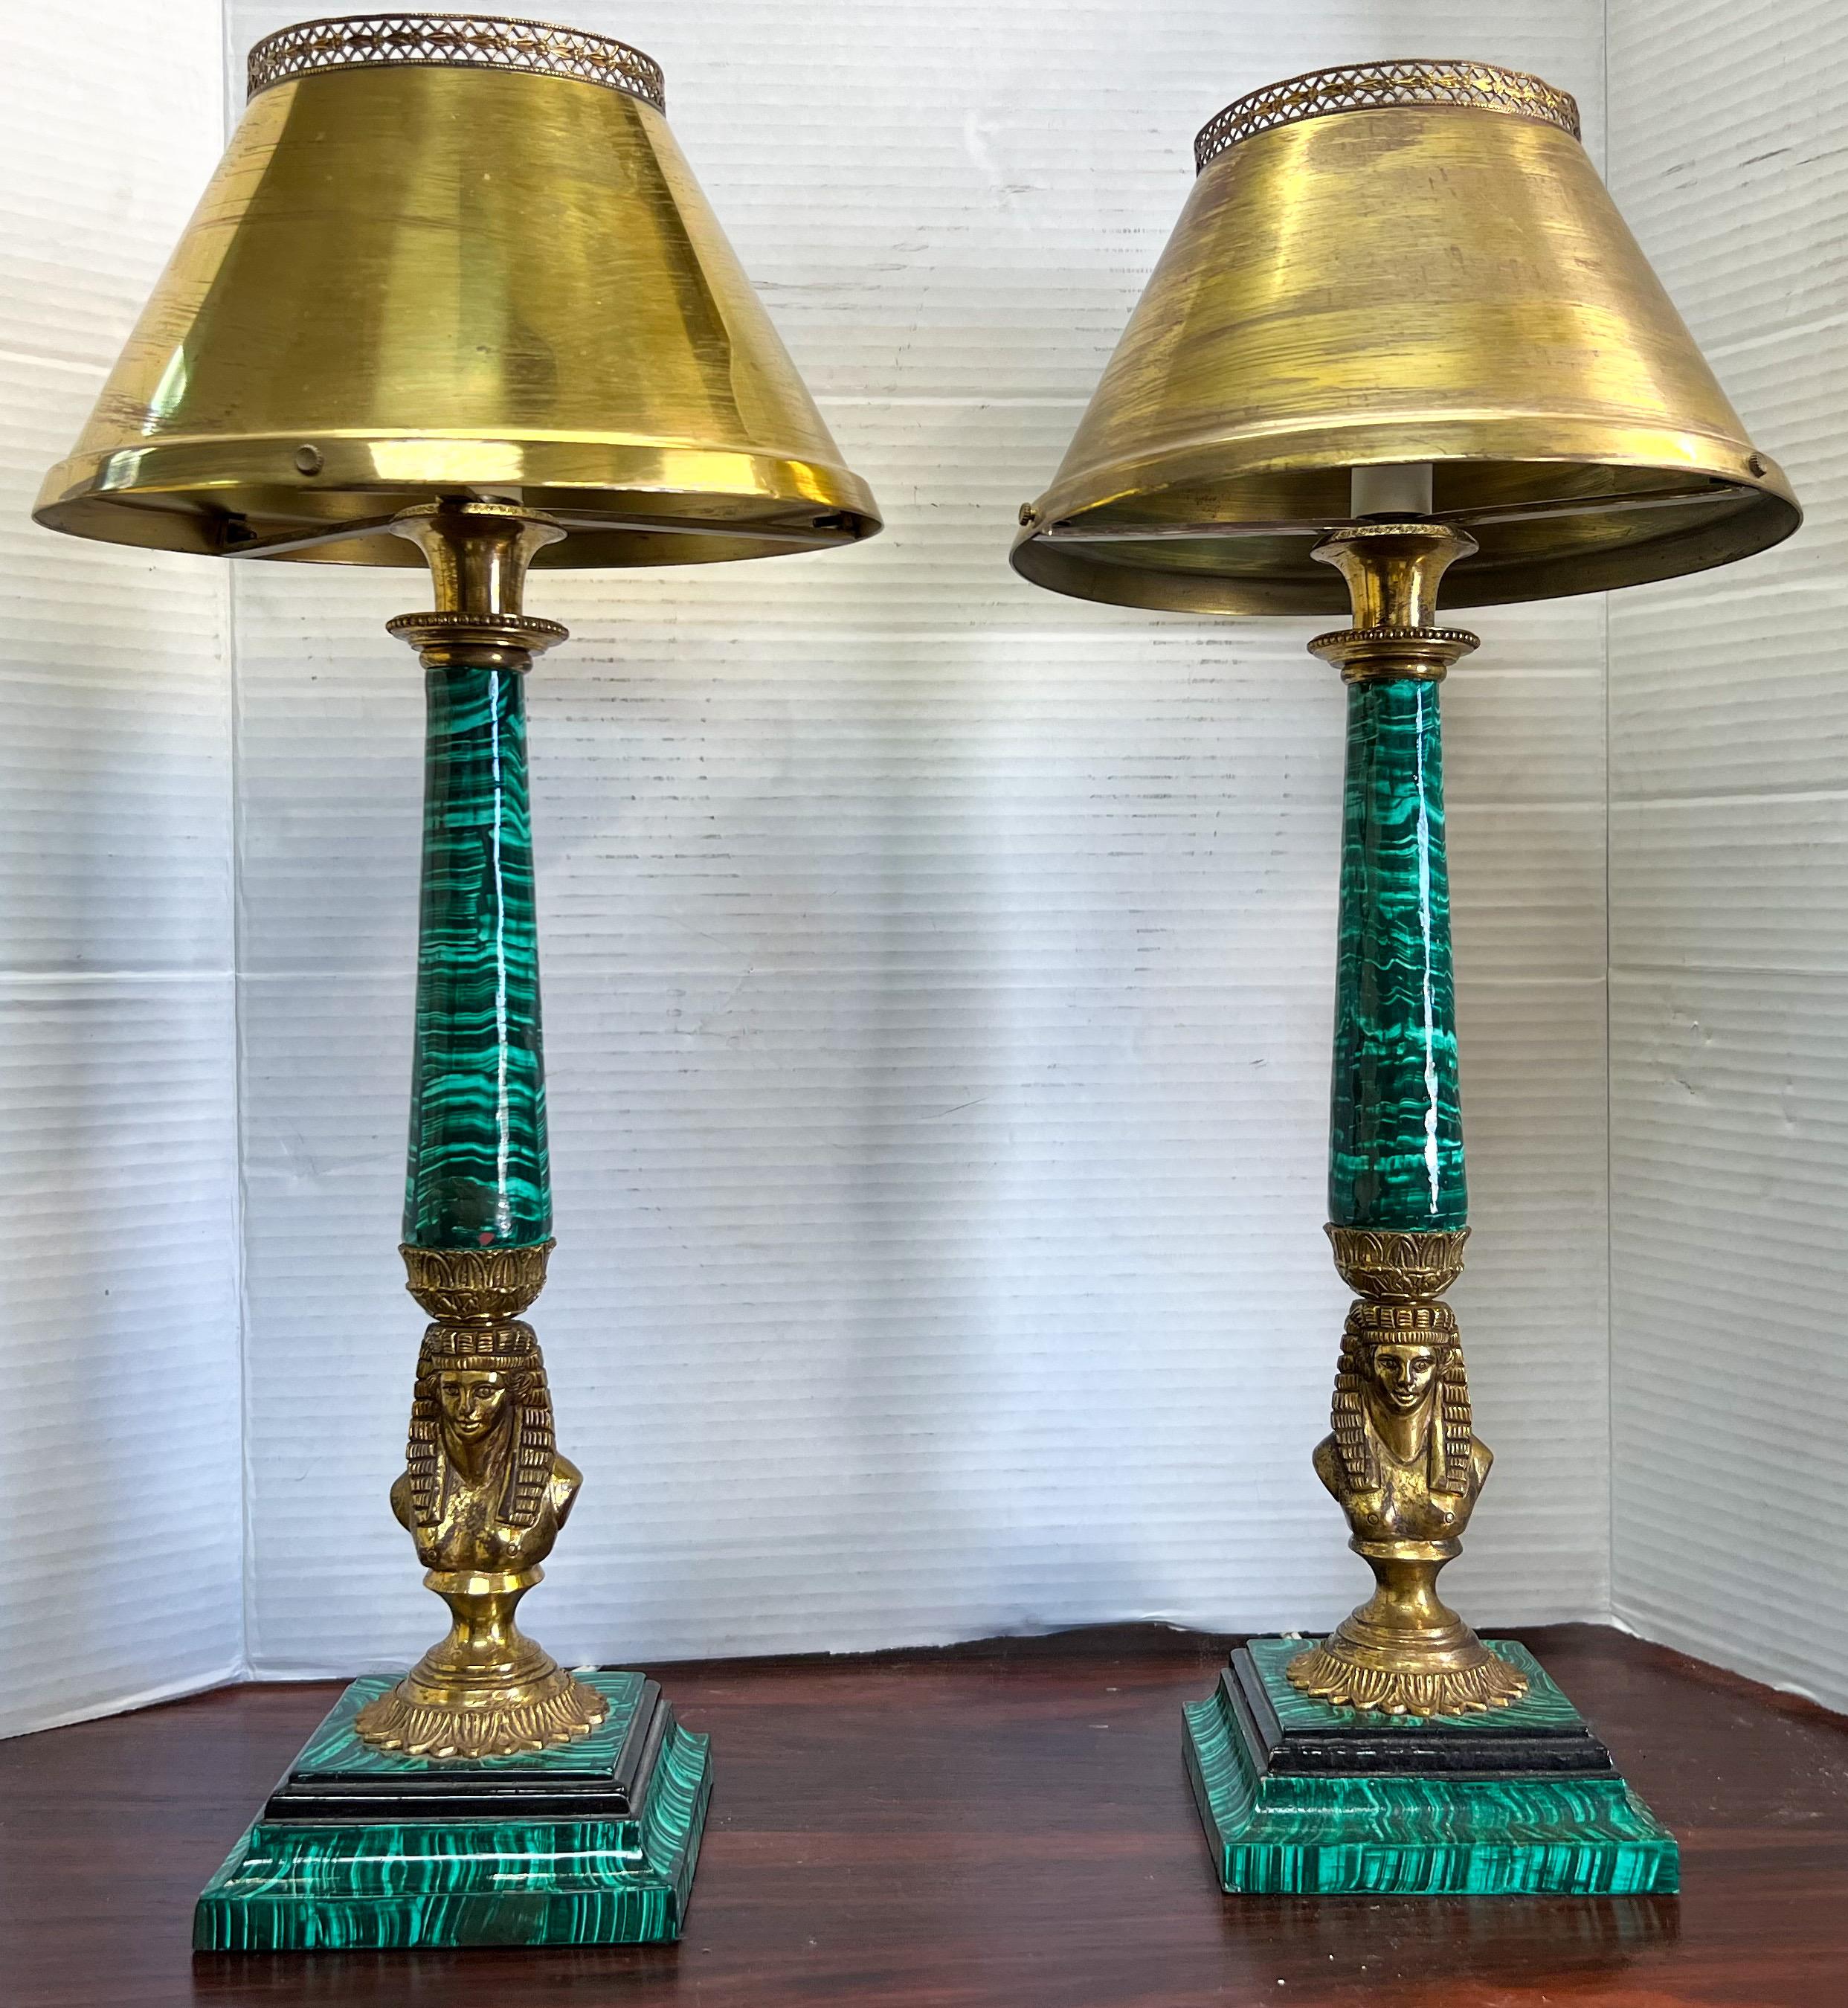 These are a showstopper! This is a pair of Egyptian revival style table lamps. The pharaoh at the base is gilt bronze. The stems are hand painted with a faux malachite finish. The shades are brass and do show a bit of wear. They are in working order.